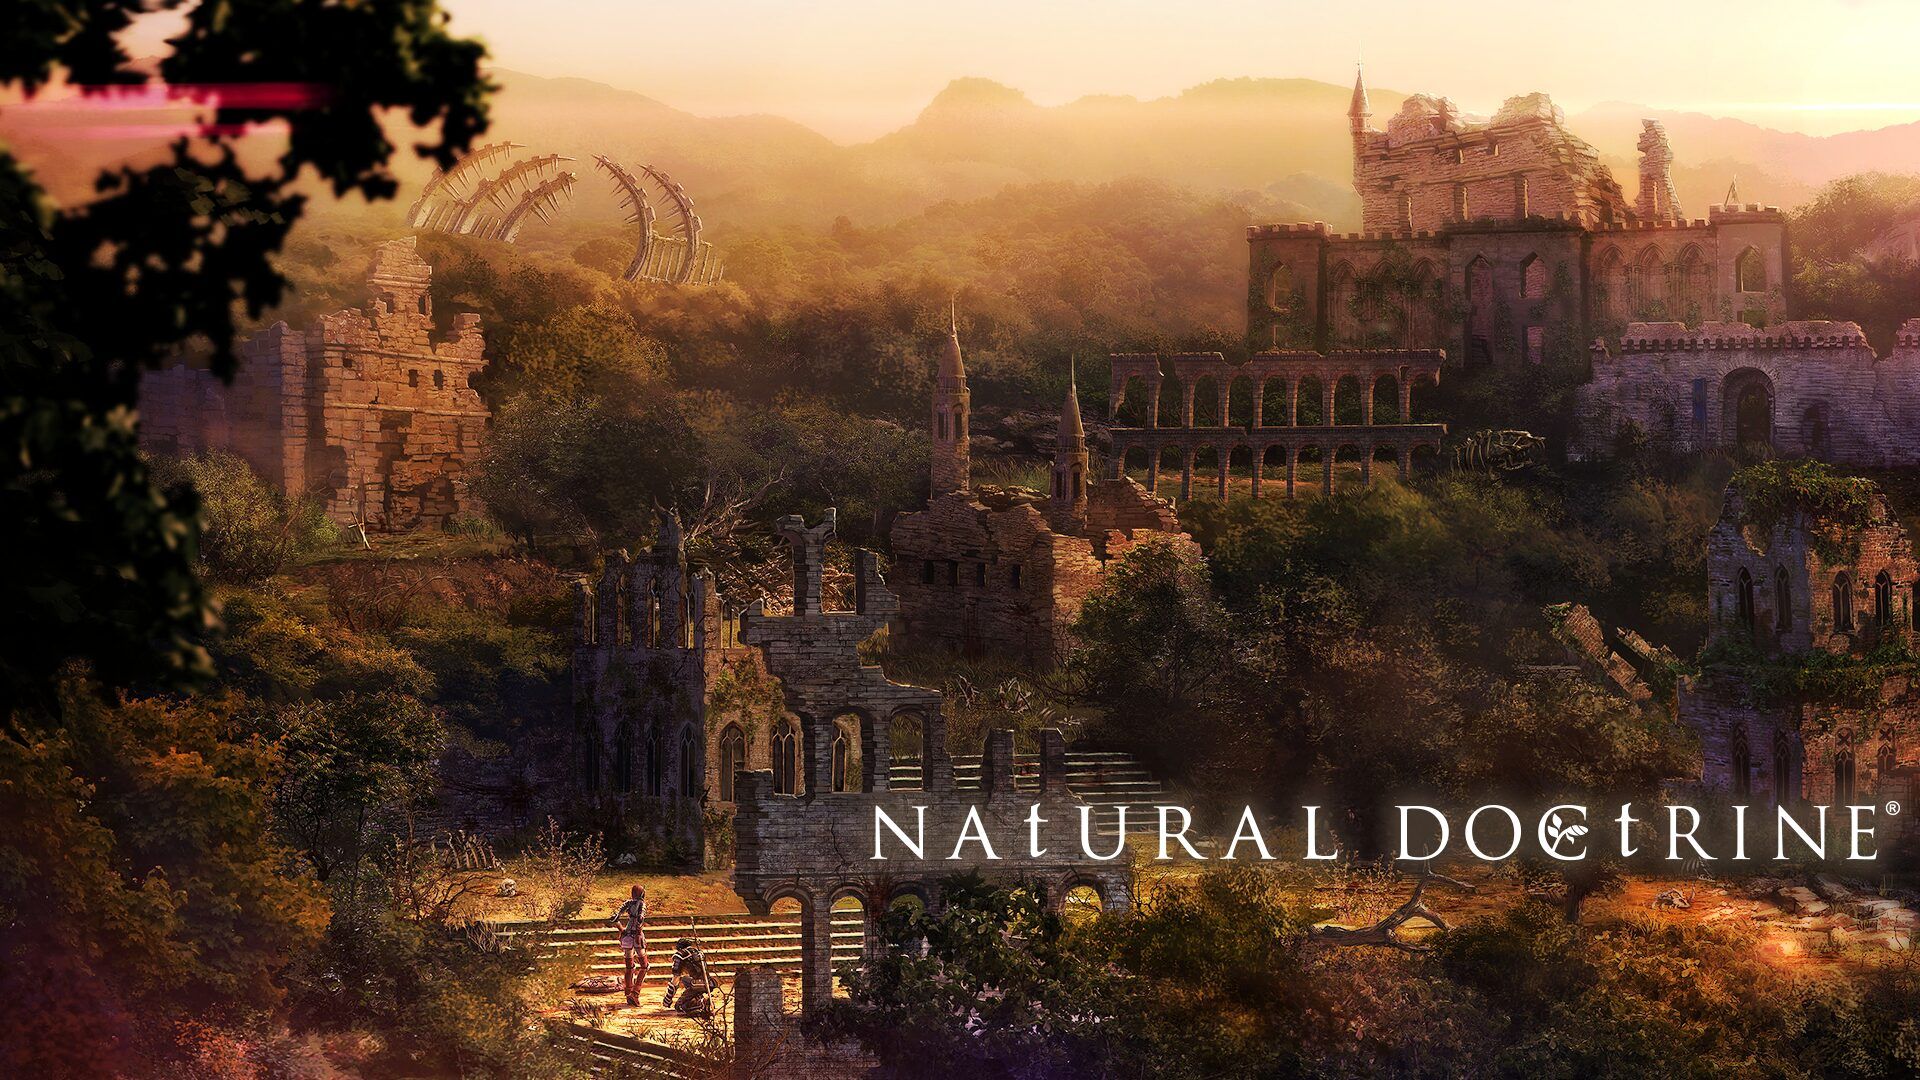 NAtURAL DOCtRINE cover image